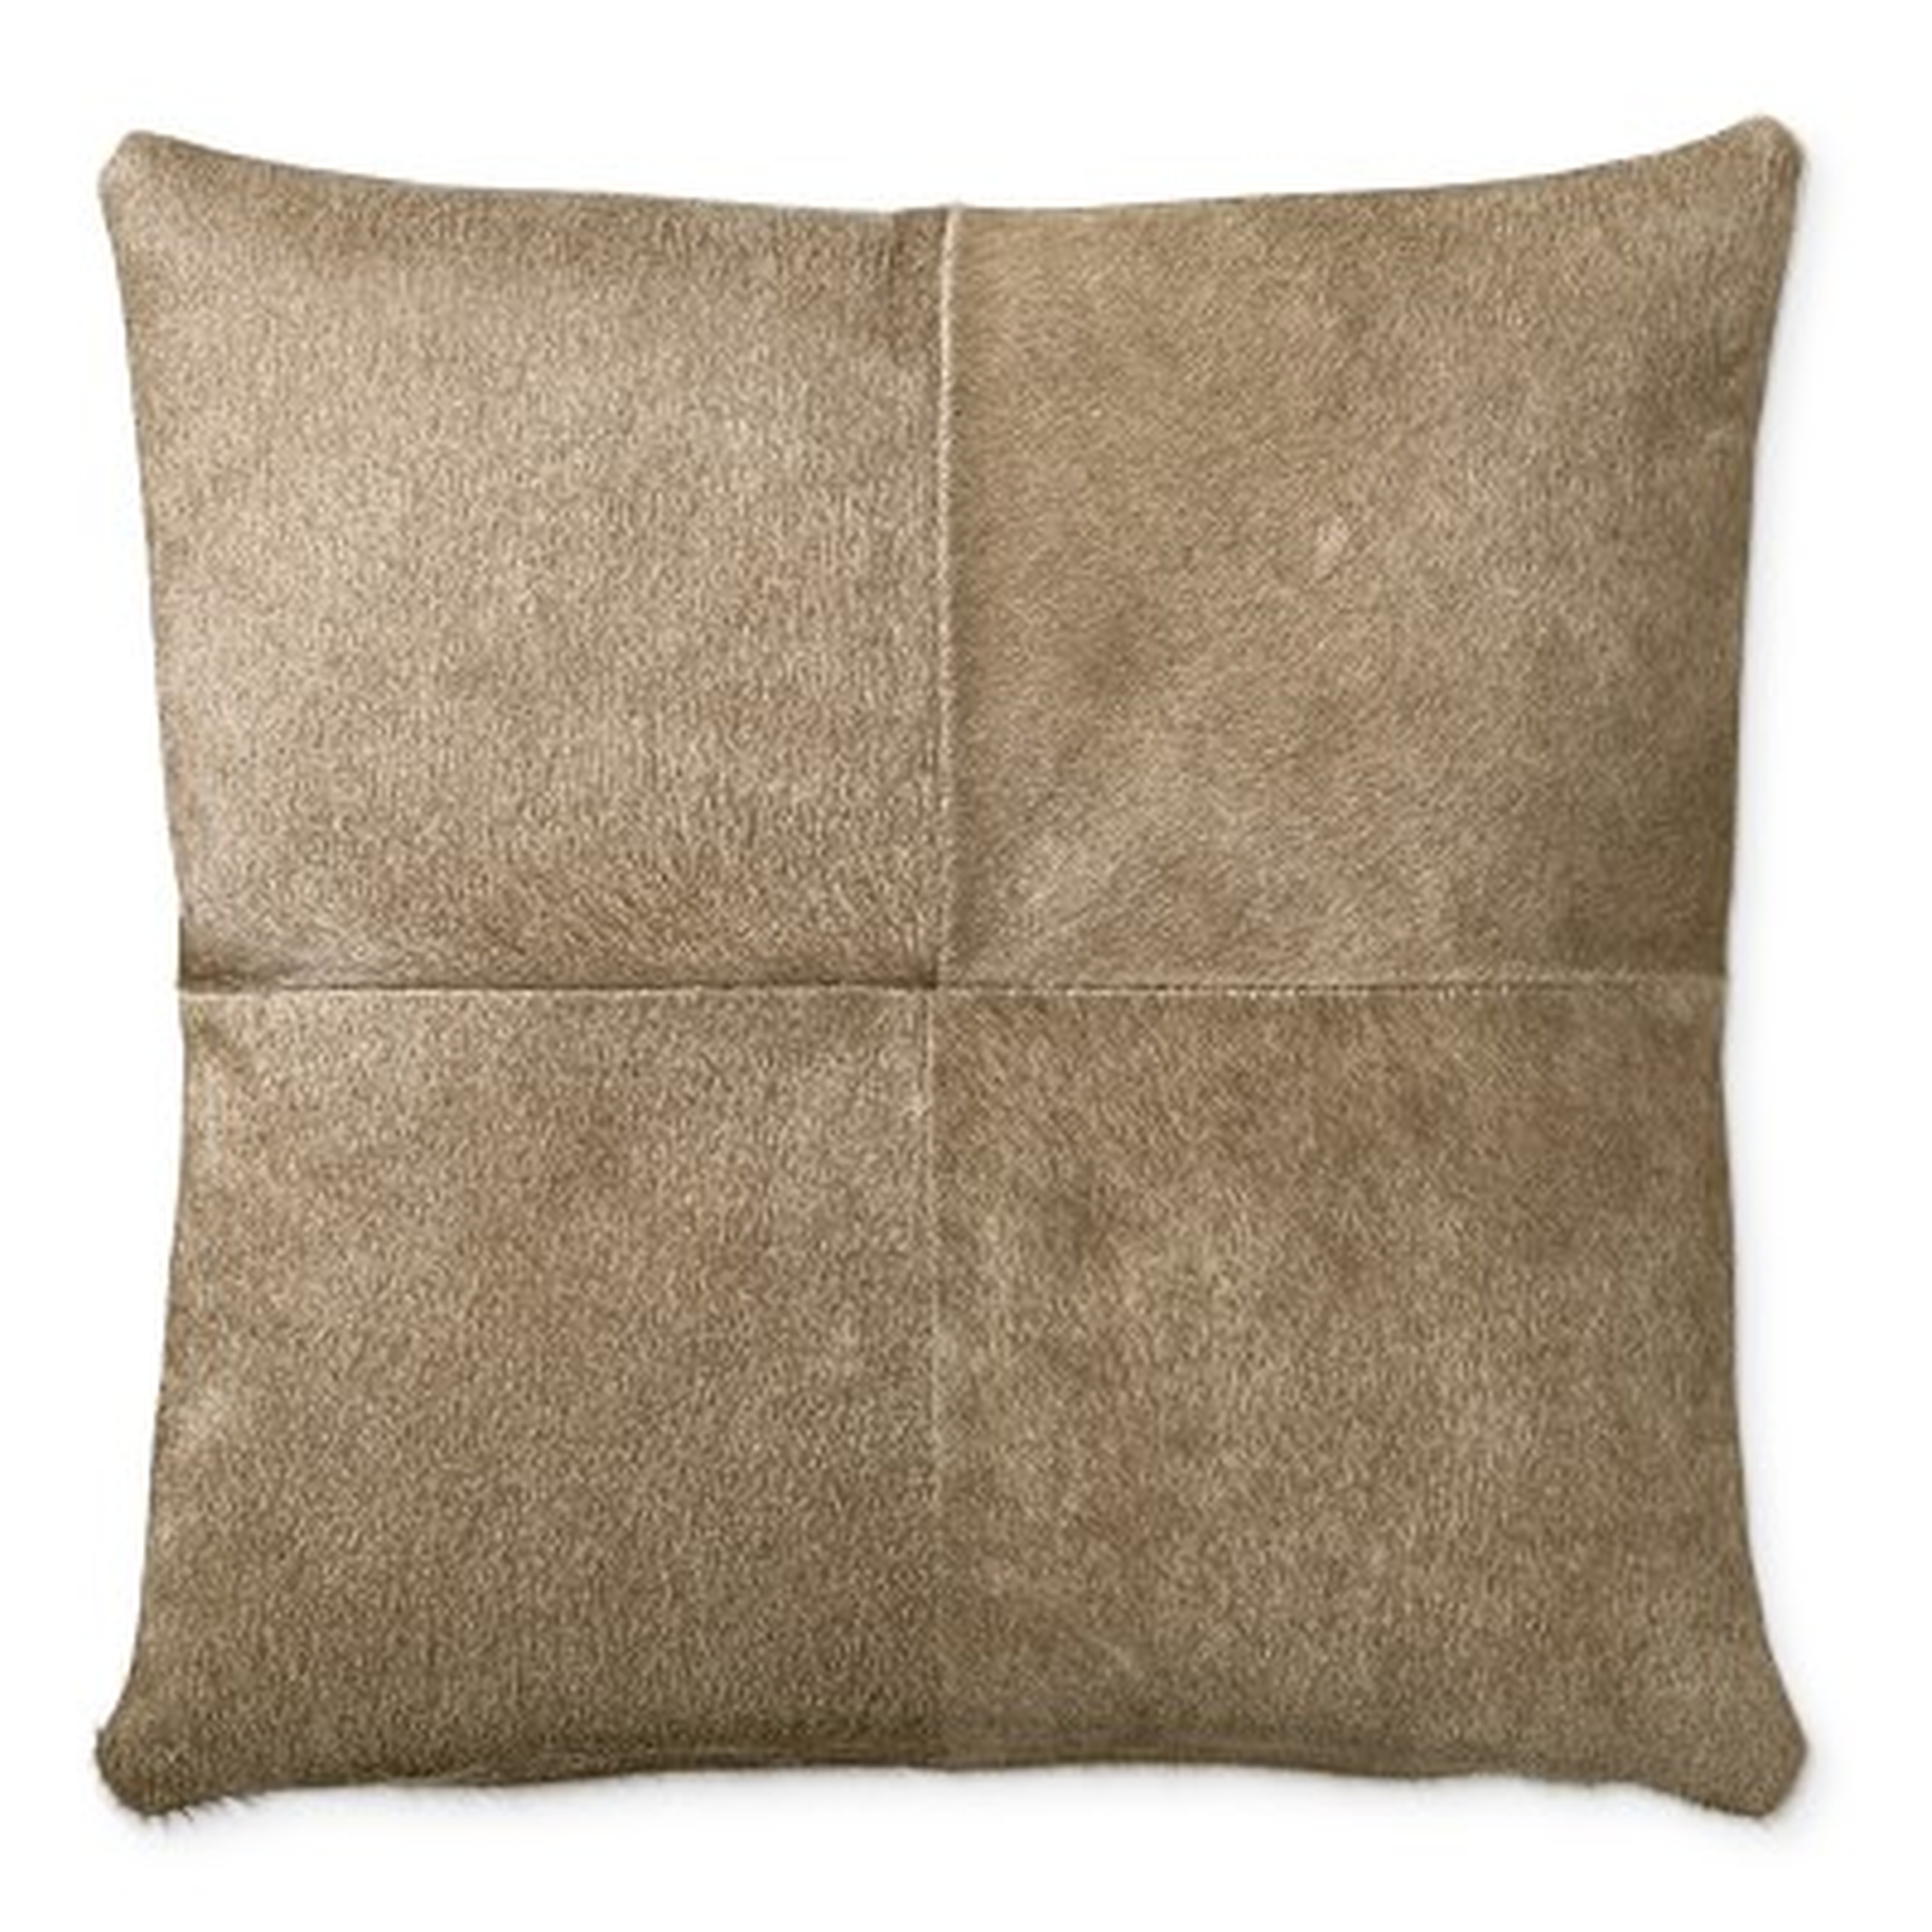 Solid Hide Pillow Cover, 20" X 20", Brown - Williams Sonoma